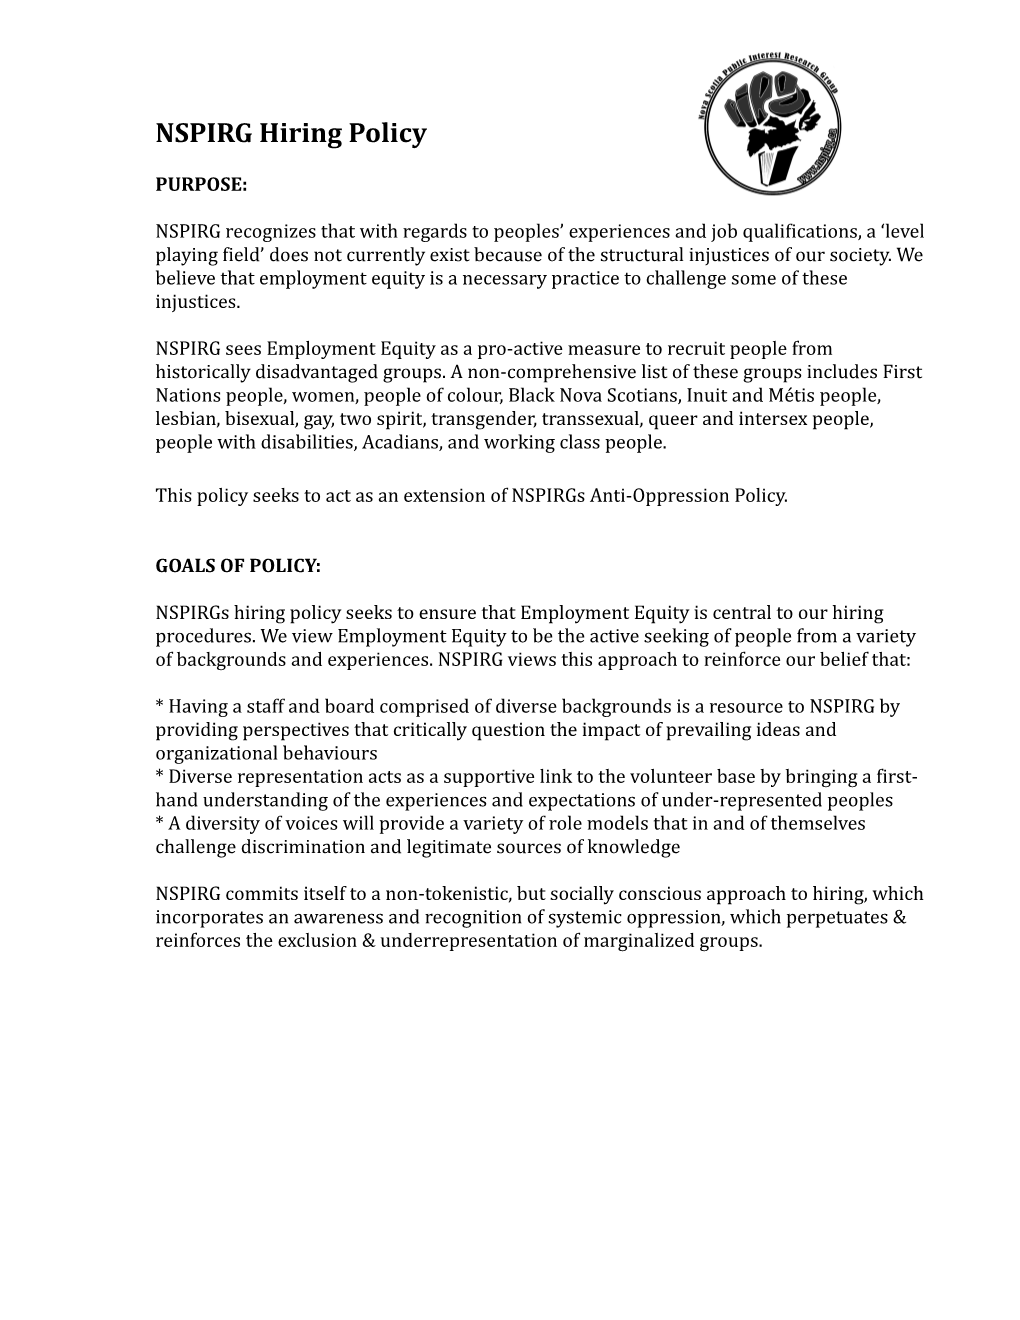 NSPIRG Hiring Policy PURPOSE:NSPIRG Recognizes That with Regards to Peoples Experiences